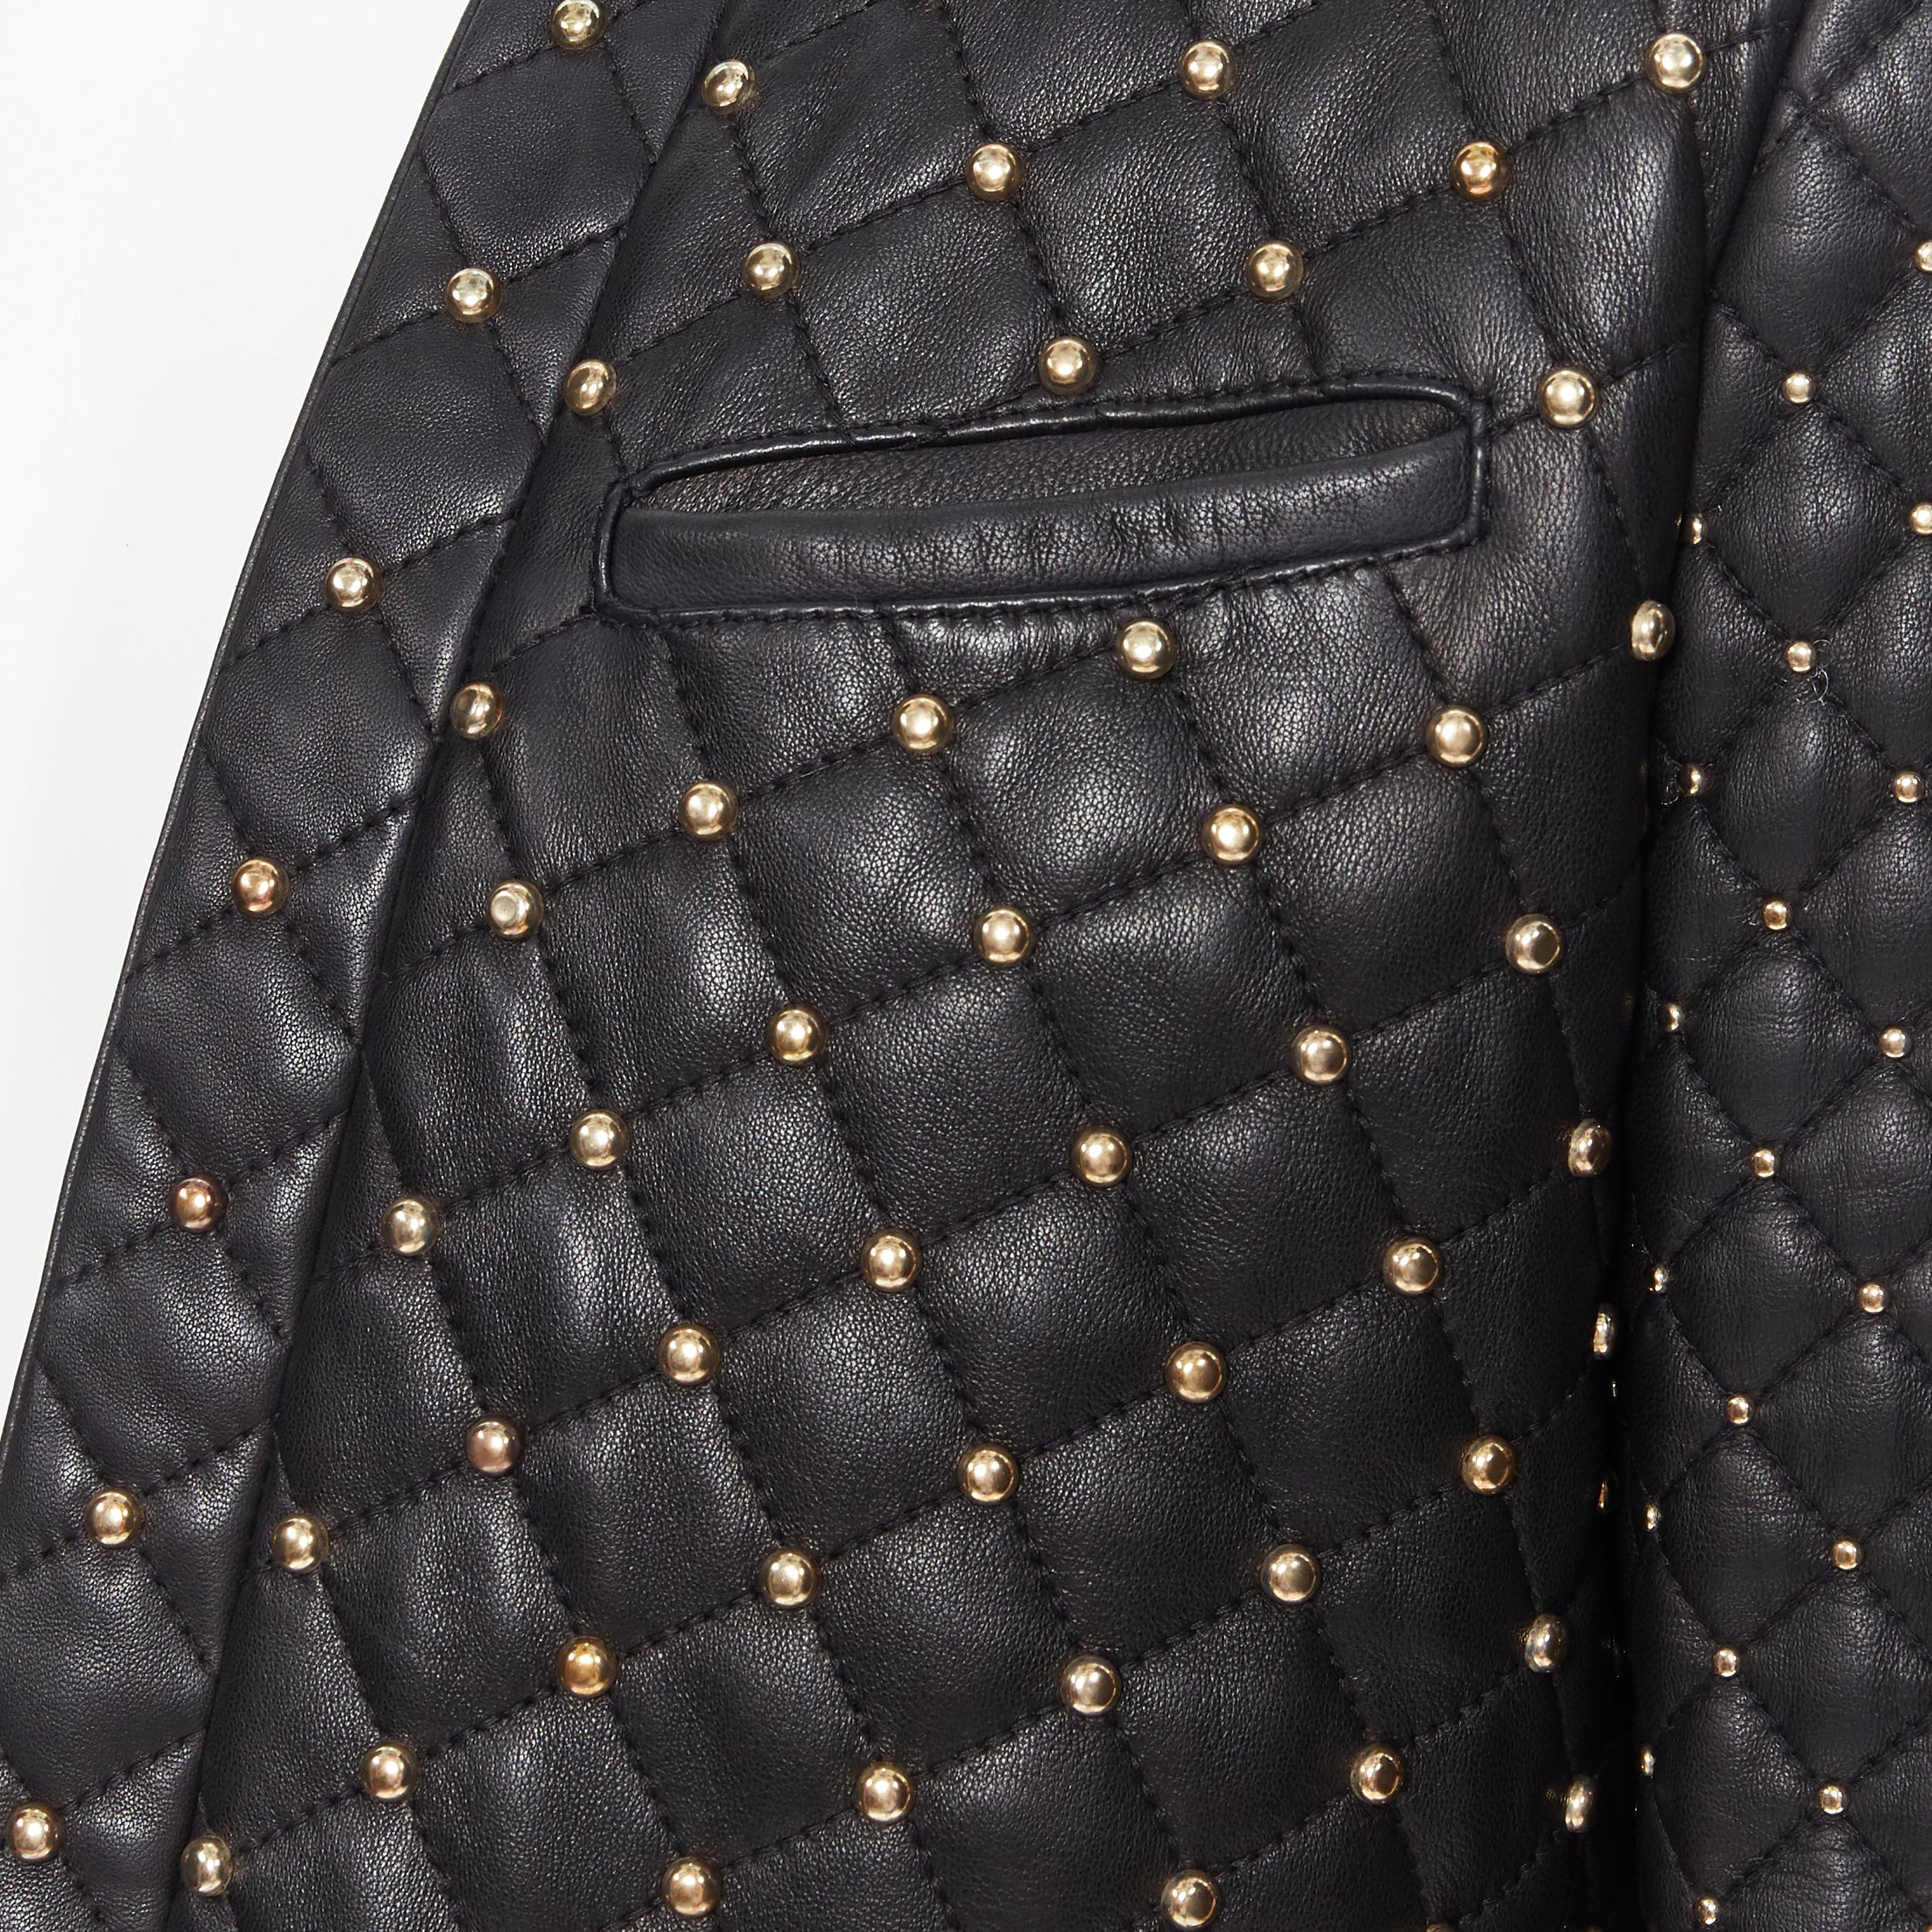 new BALMAIN black lambskin leather gold stud diamond quilted jacket EU48 M
Brand: Balmain
Designer: Olivier Rousteing
Model Name / Style: Leather jacket
Material: Leather
Color: Black
Pattern: Solid
Extra Detail: BALMAIN style code: W7H7765P089C.